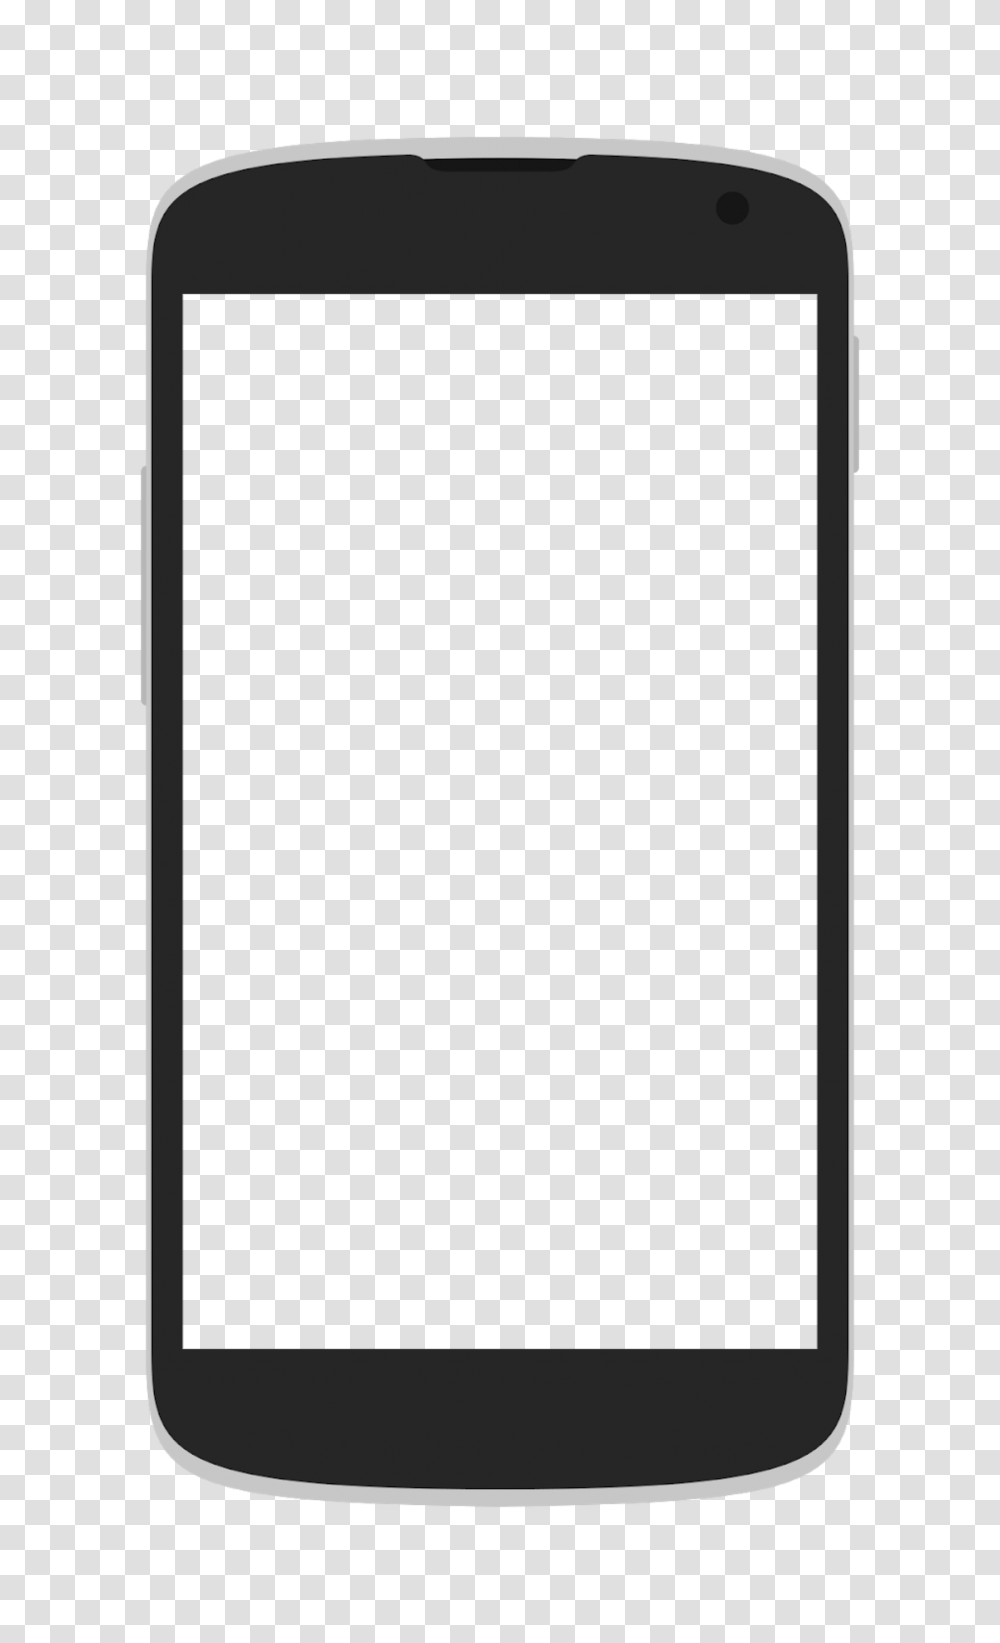 Mobile Frame Full Hd Mobiles Hd, Mobile Phone, Electronics, Lamp Post Transparent Png